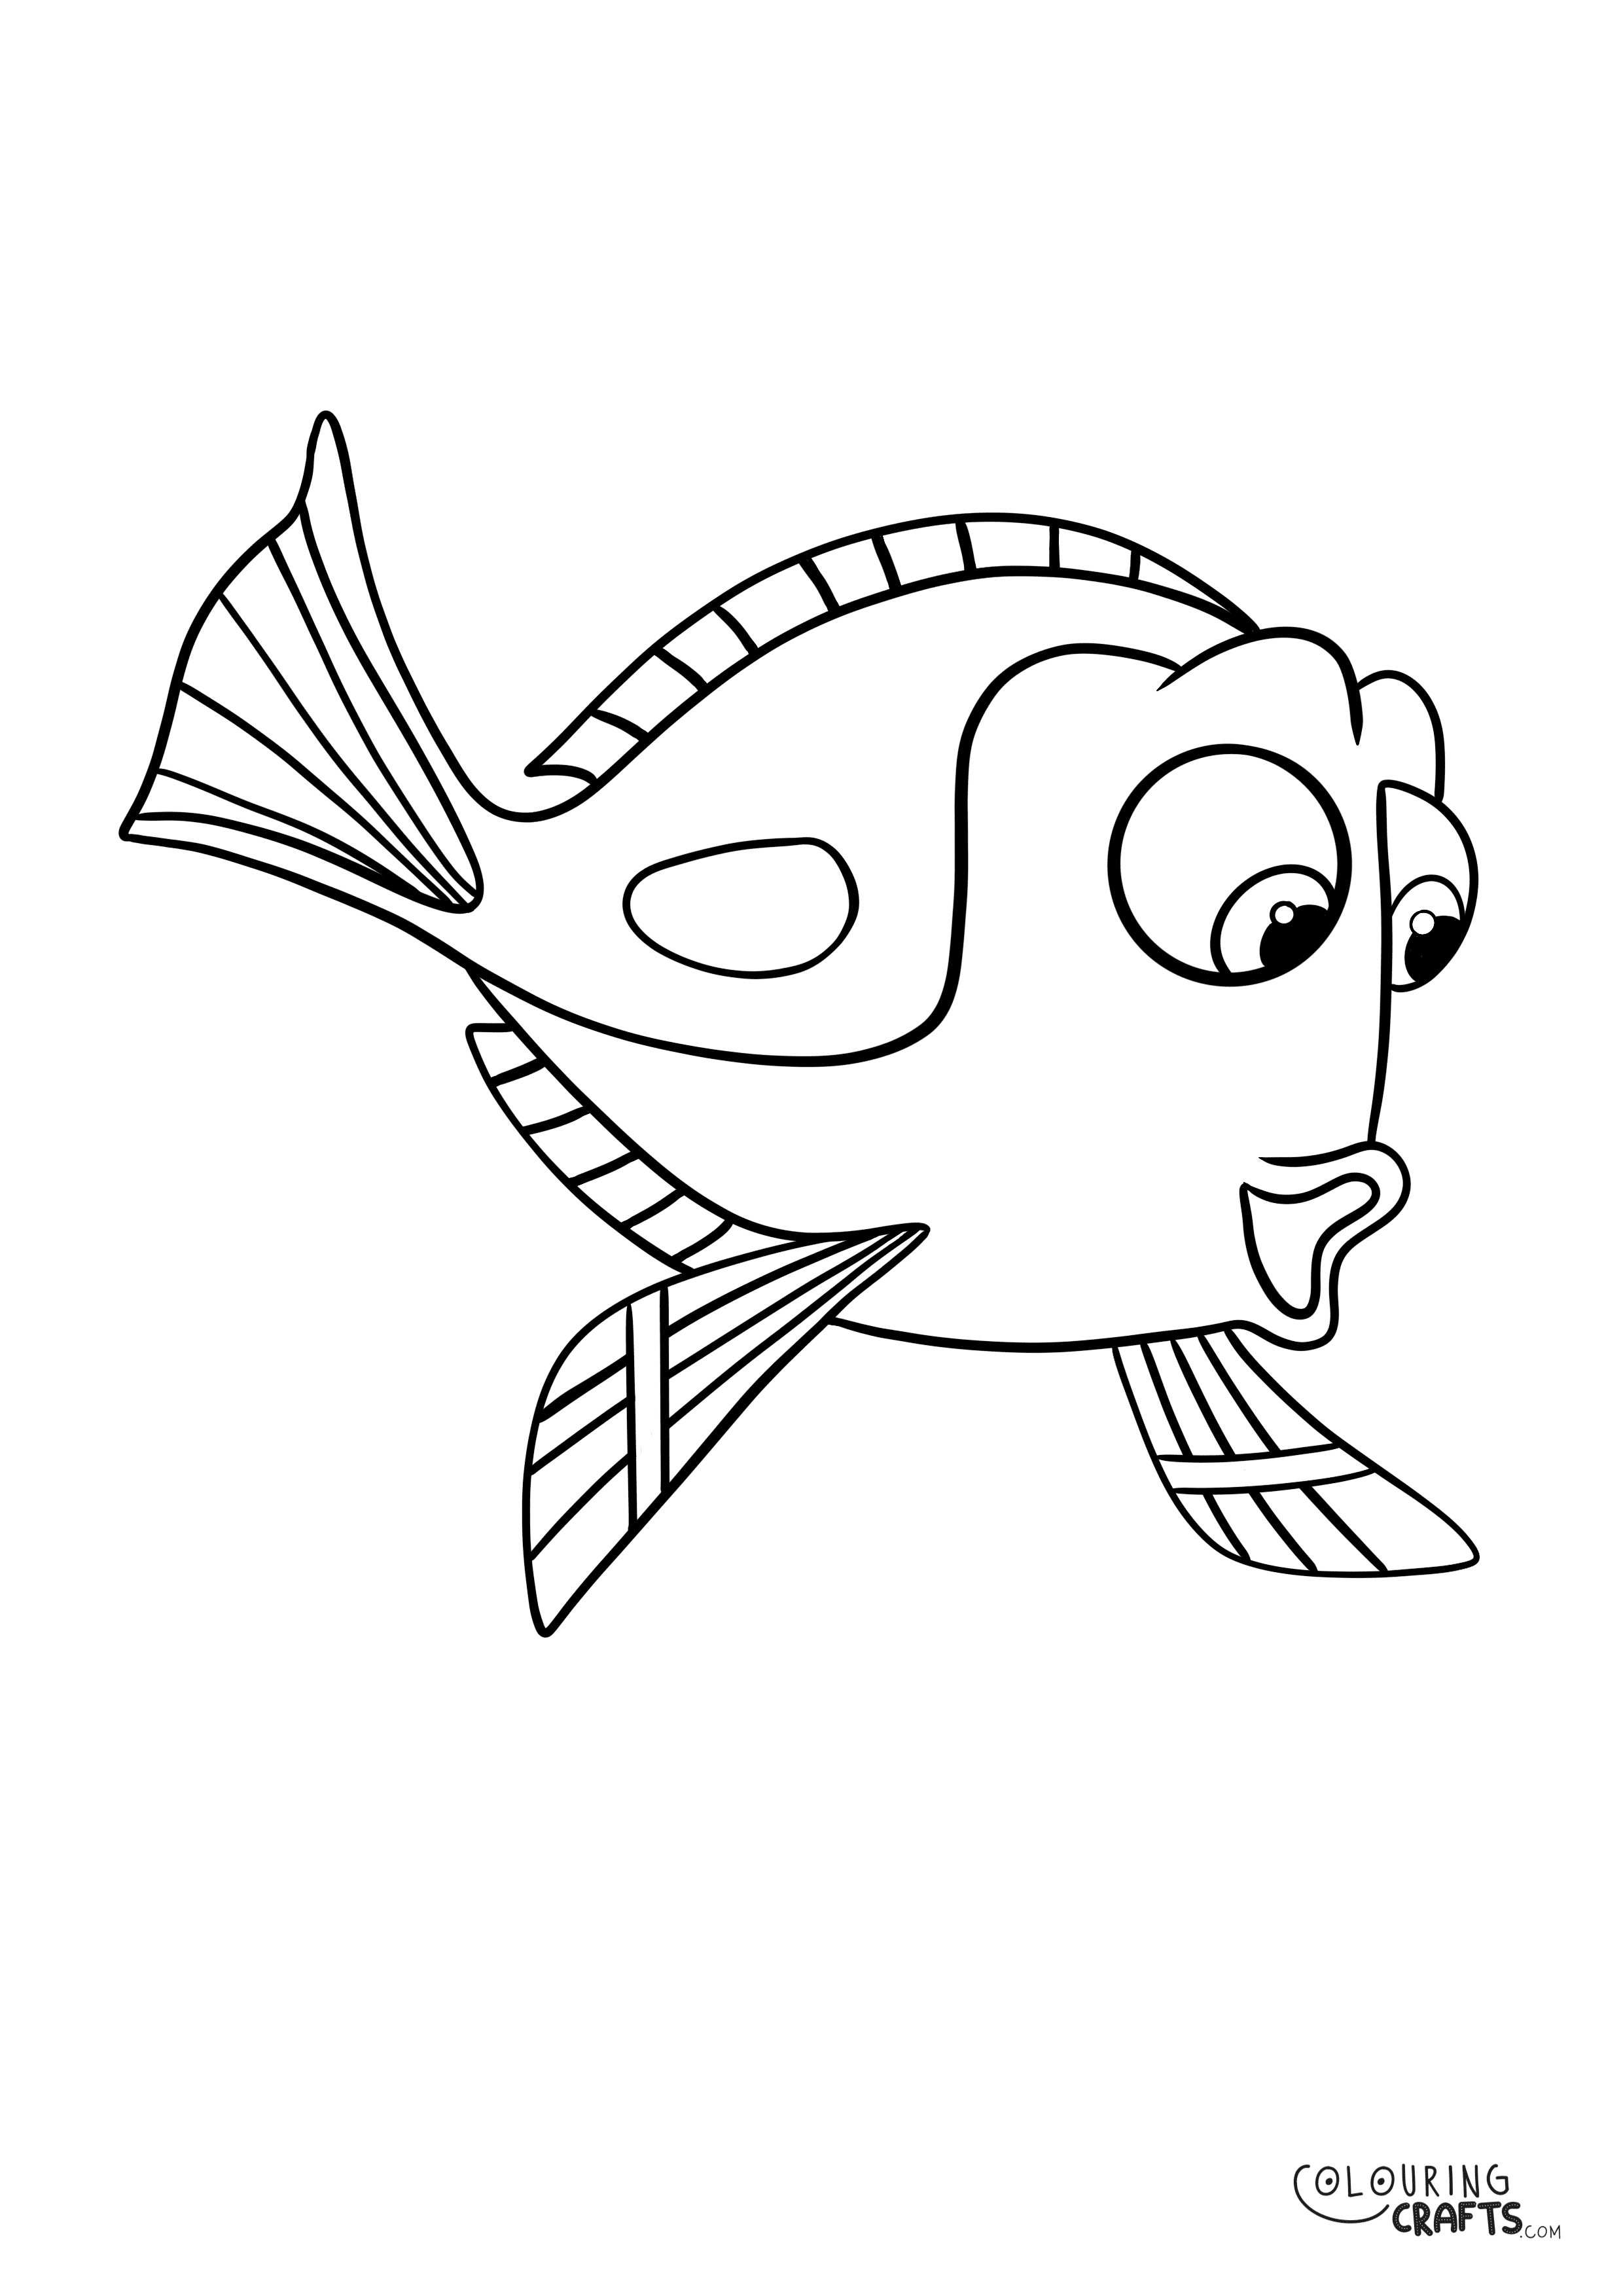 Dory Finding Nemo Colouring Page - Colouring Crafts